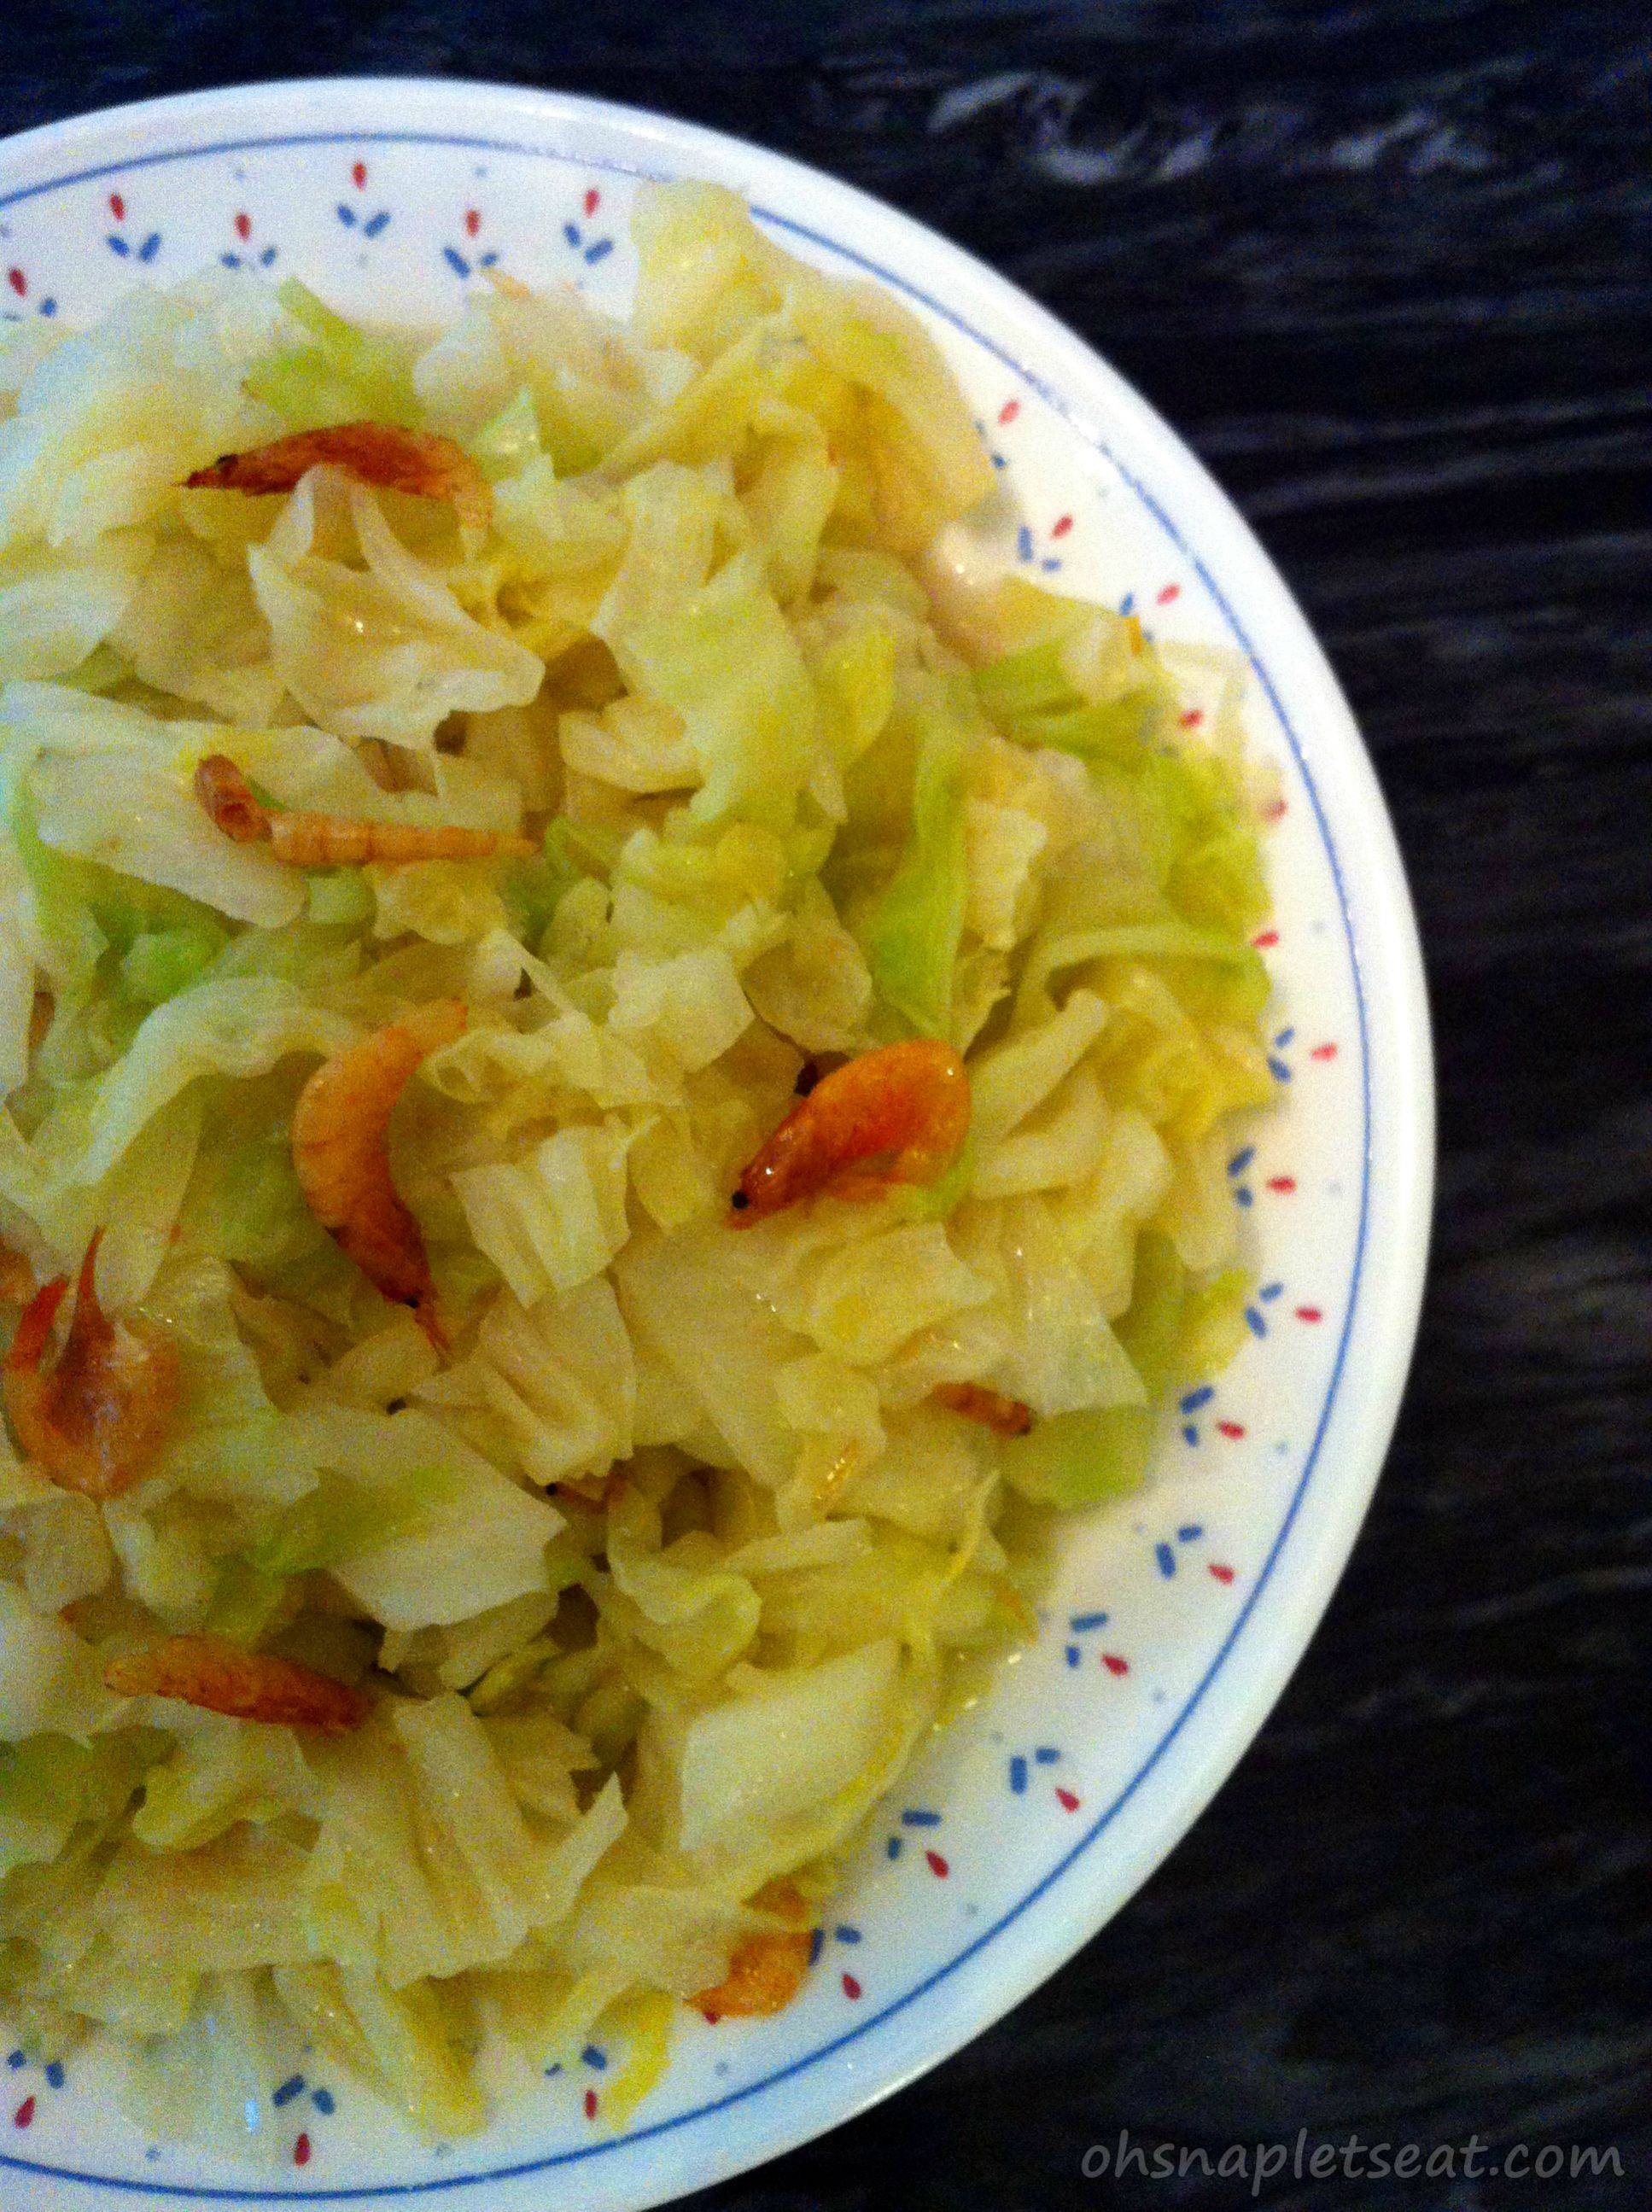 What are some recipes that use Chinese cabbage?